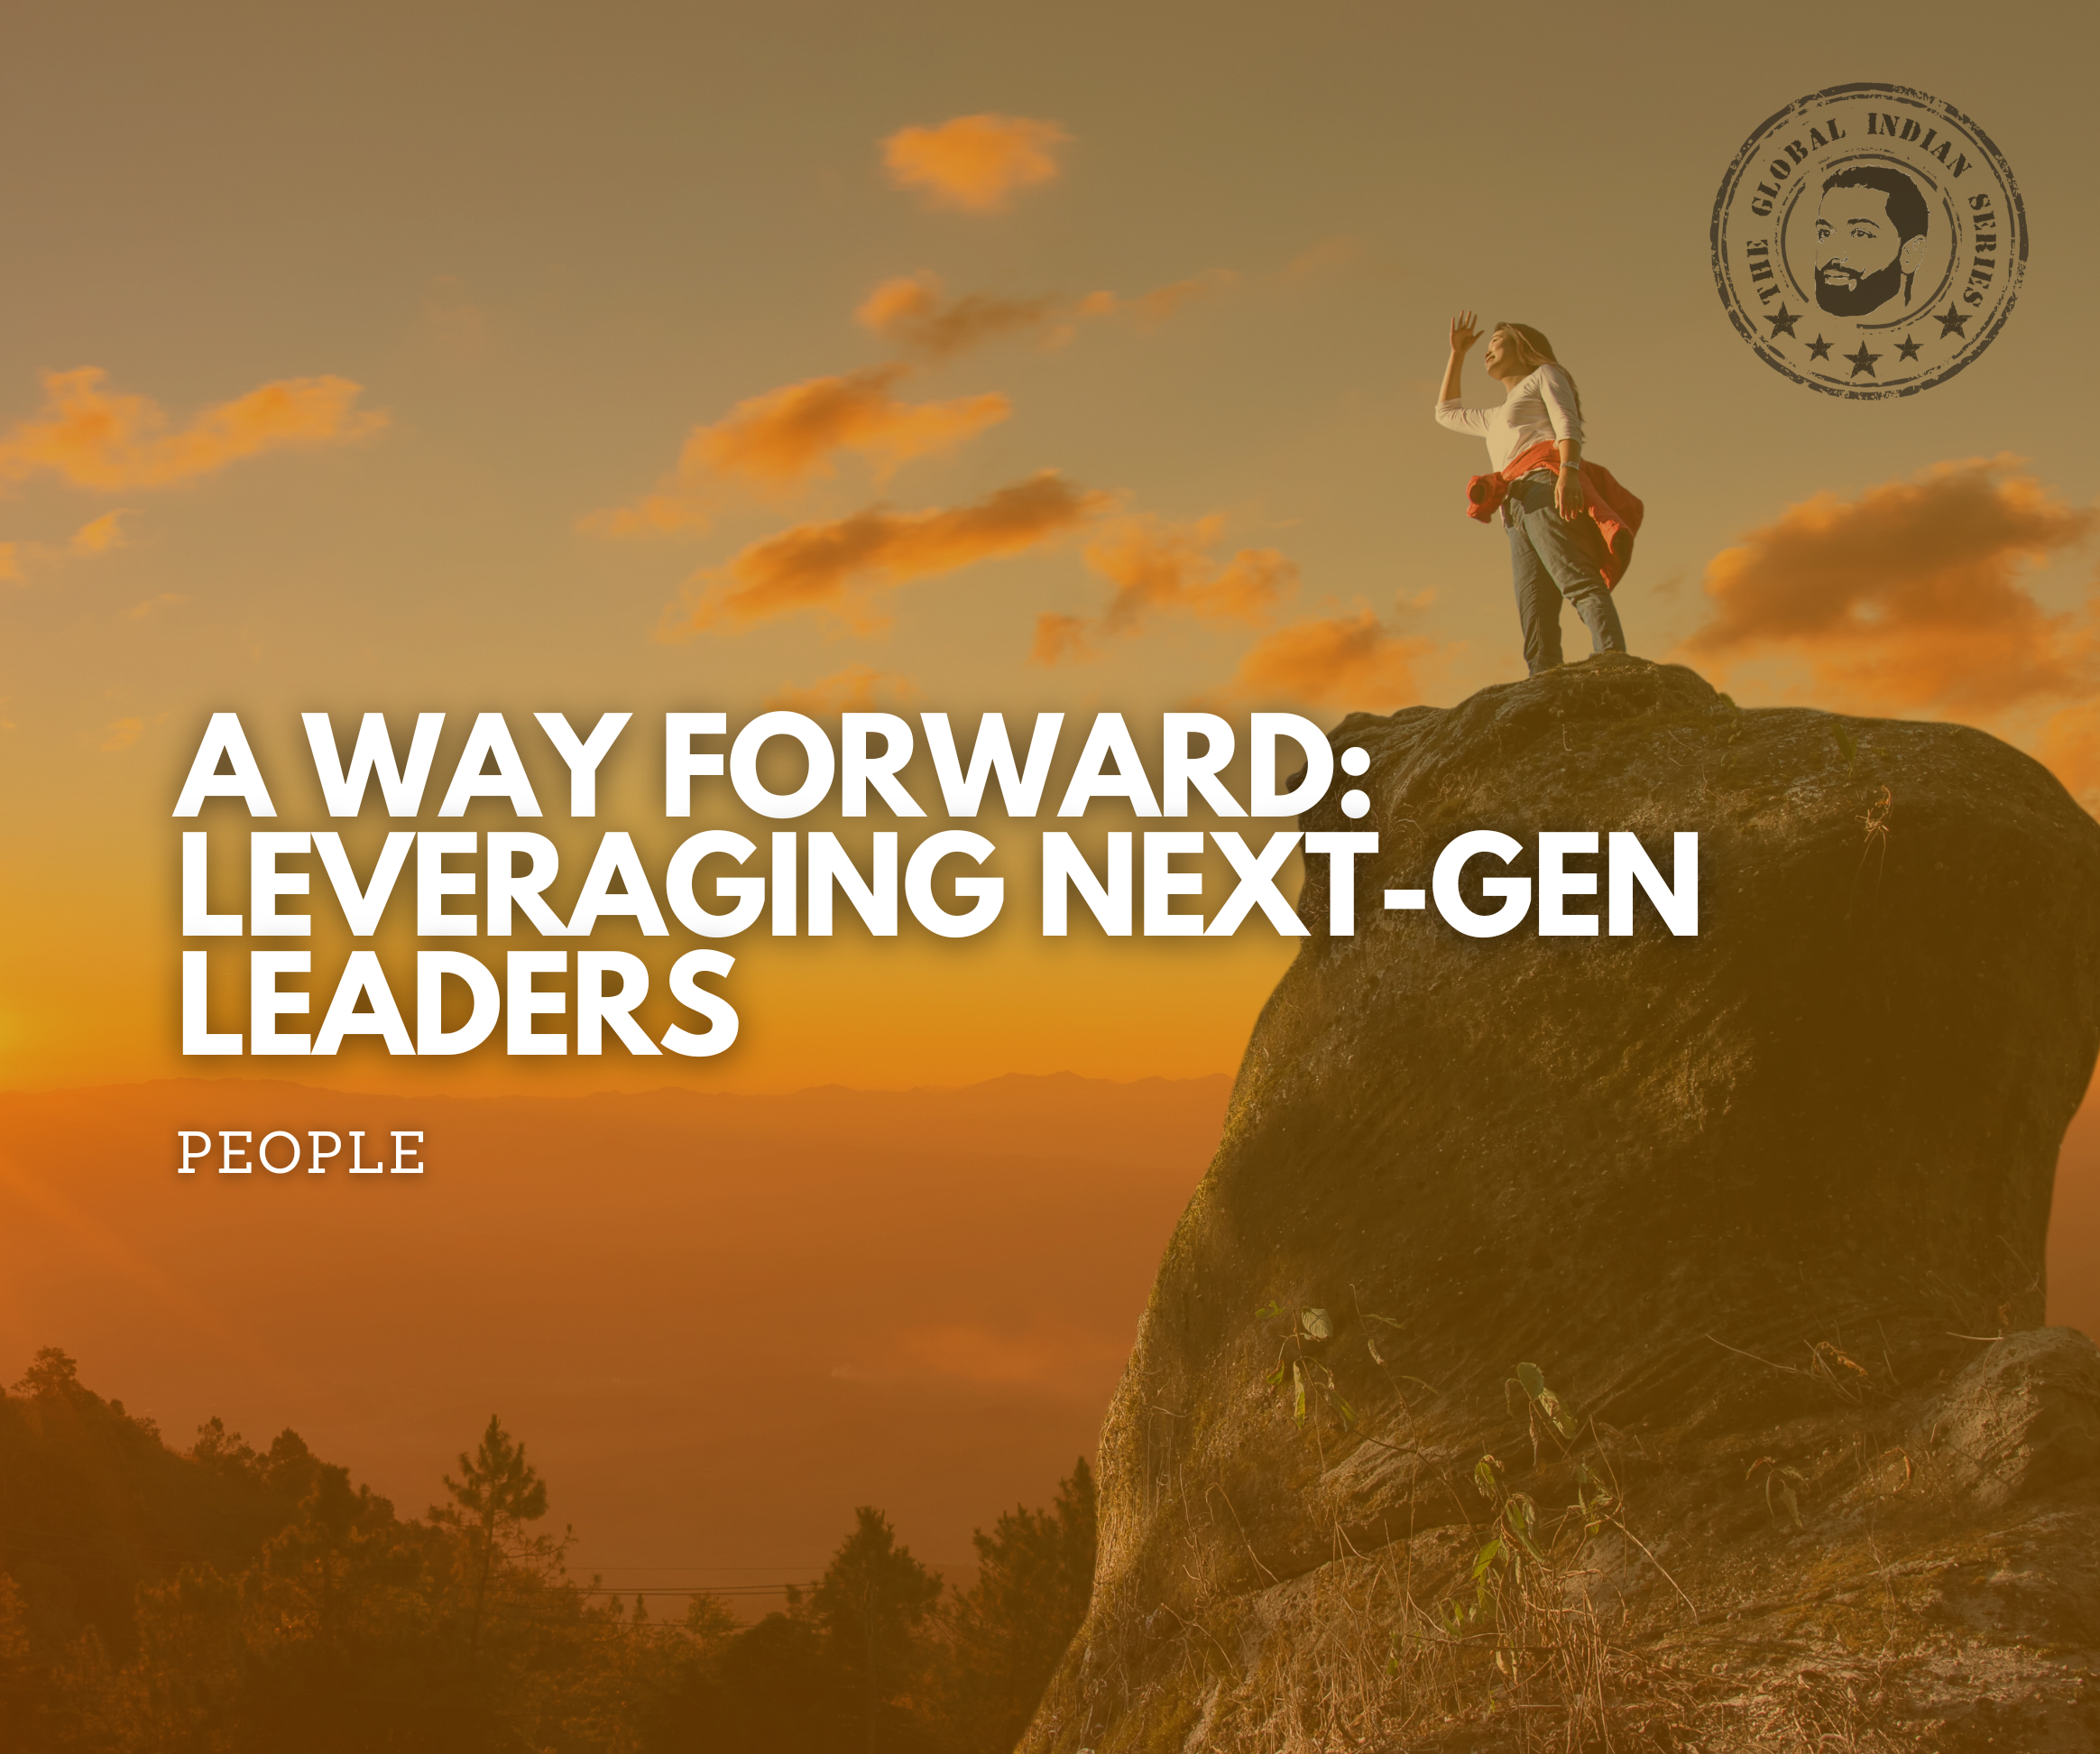 A Way Forward: Leveraging Next-Gen Leaders new-age entrepreneurs can do ‘big things’ and reach farther by setting aside their fears.